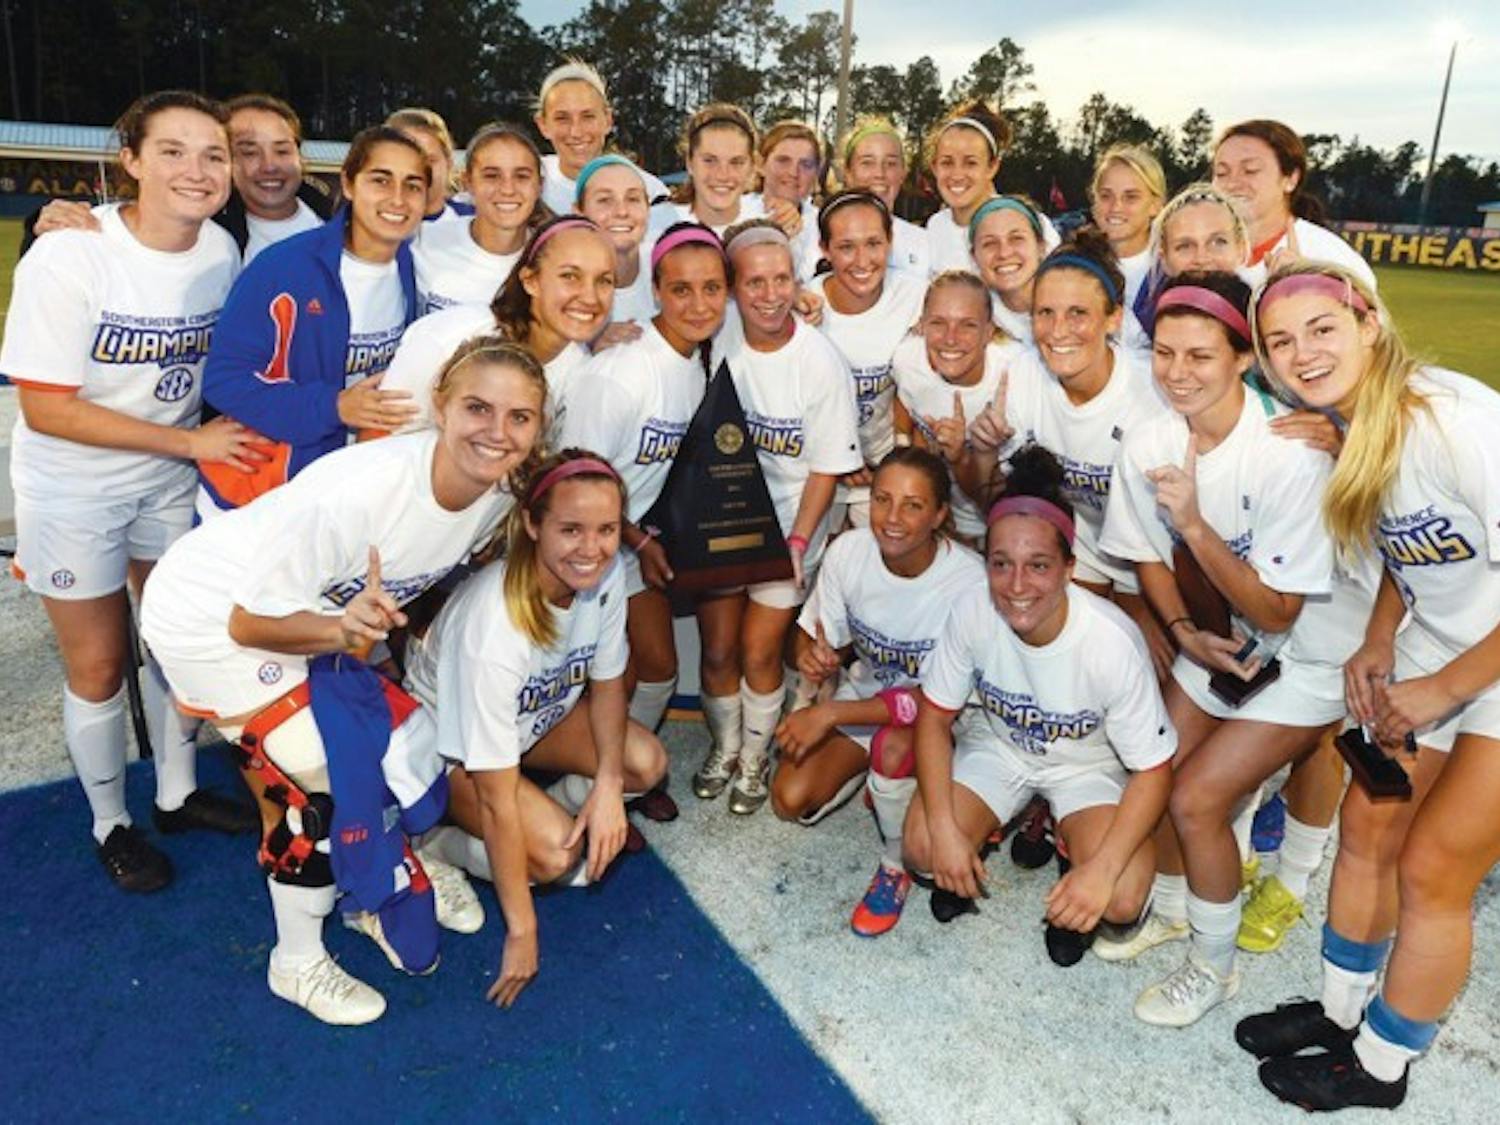 Florida’s women’s soccer team celebrates after winning the SEC Tournament with a 3-0 victory in the final against Auburn on Sunday at the Orange Beach Sportsplex in Orange Beach, Ala.